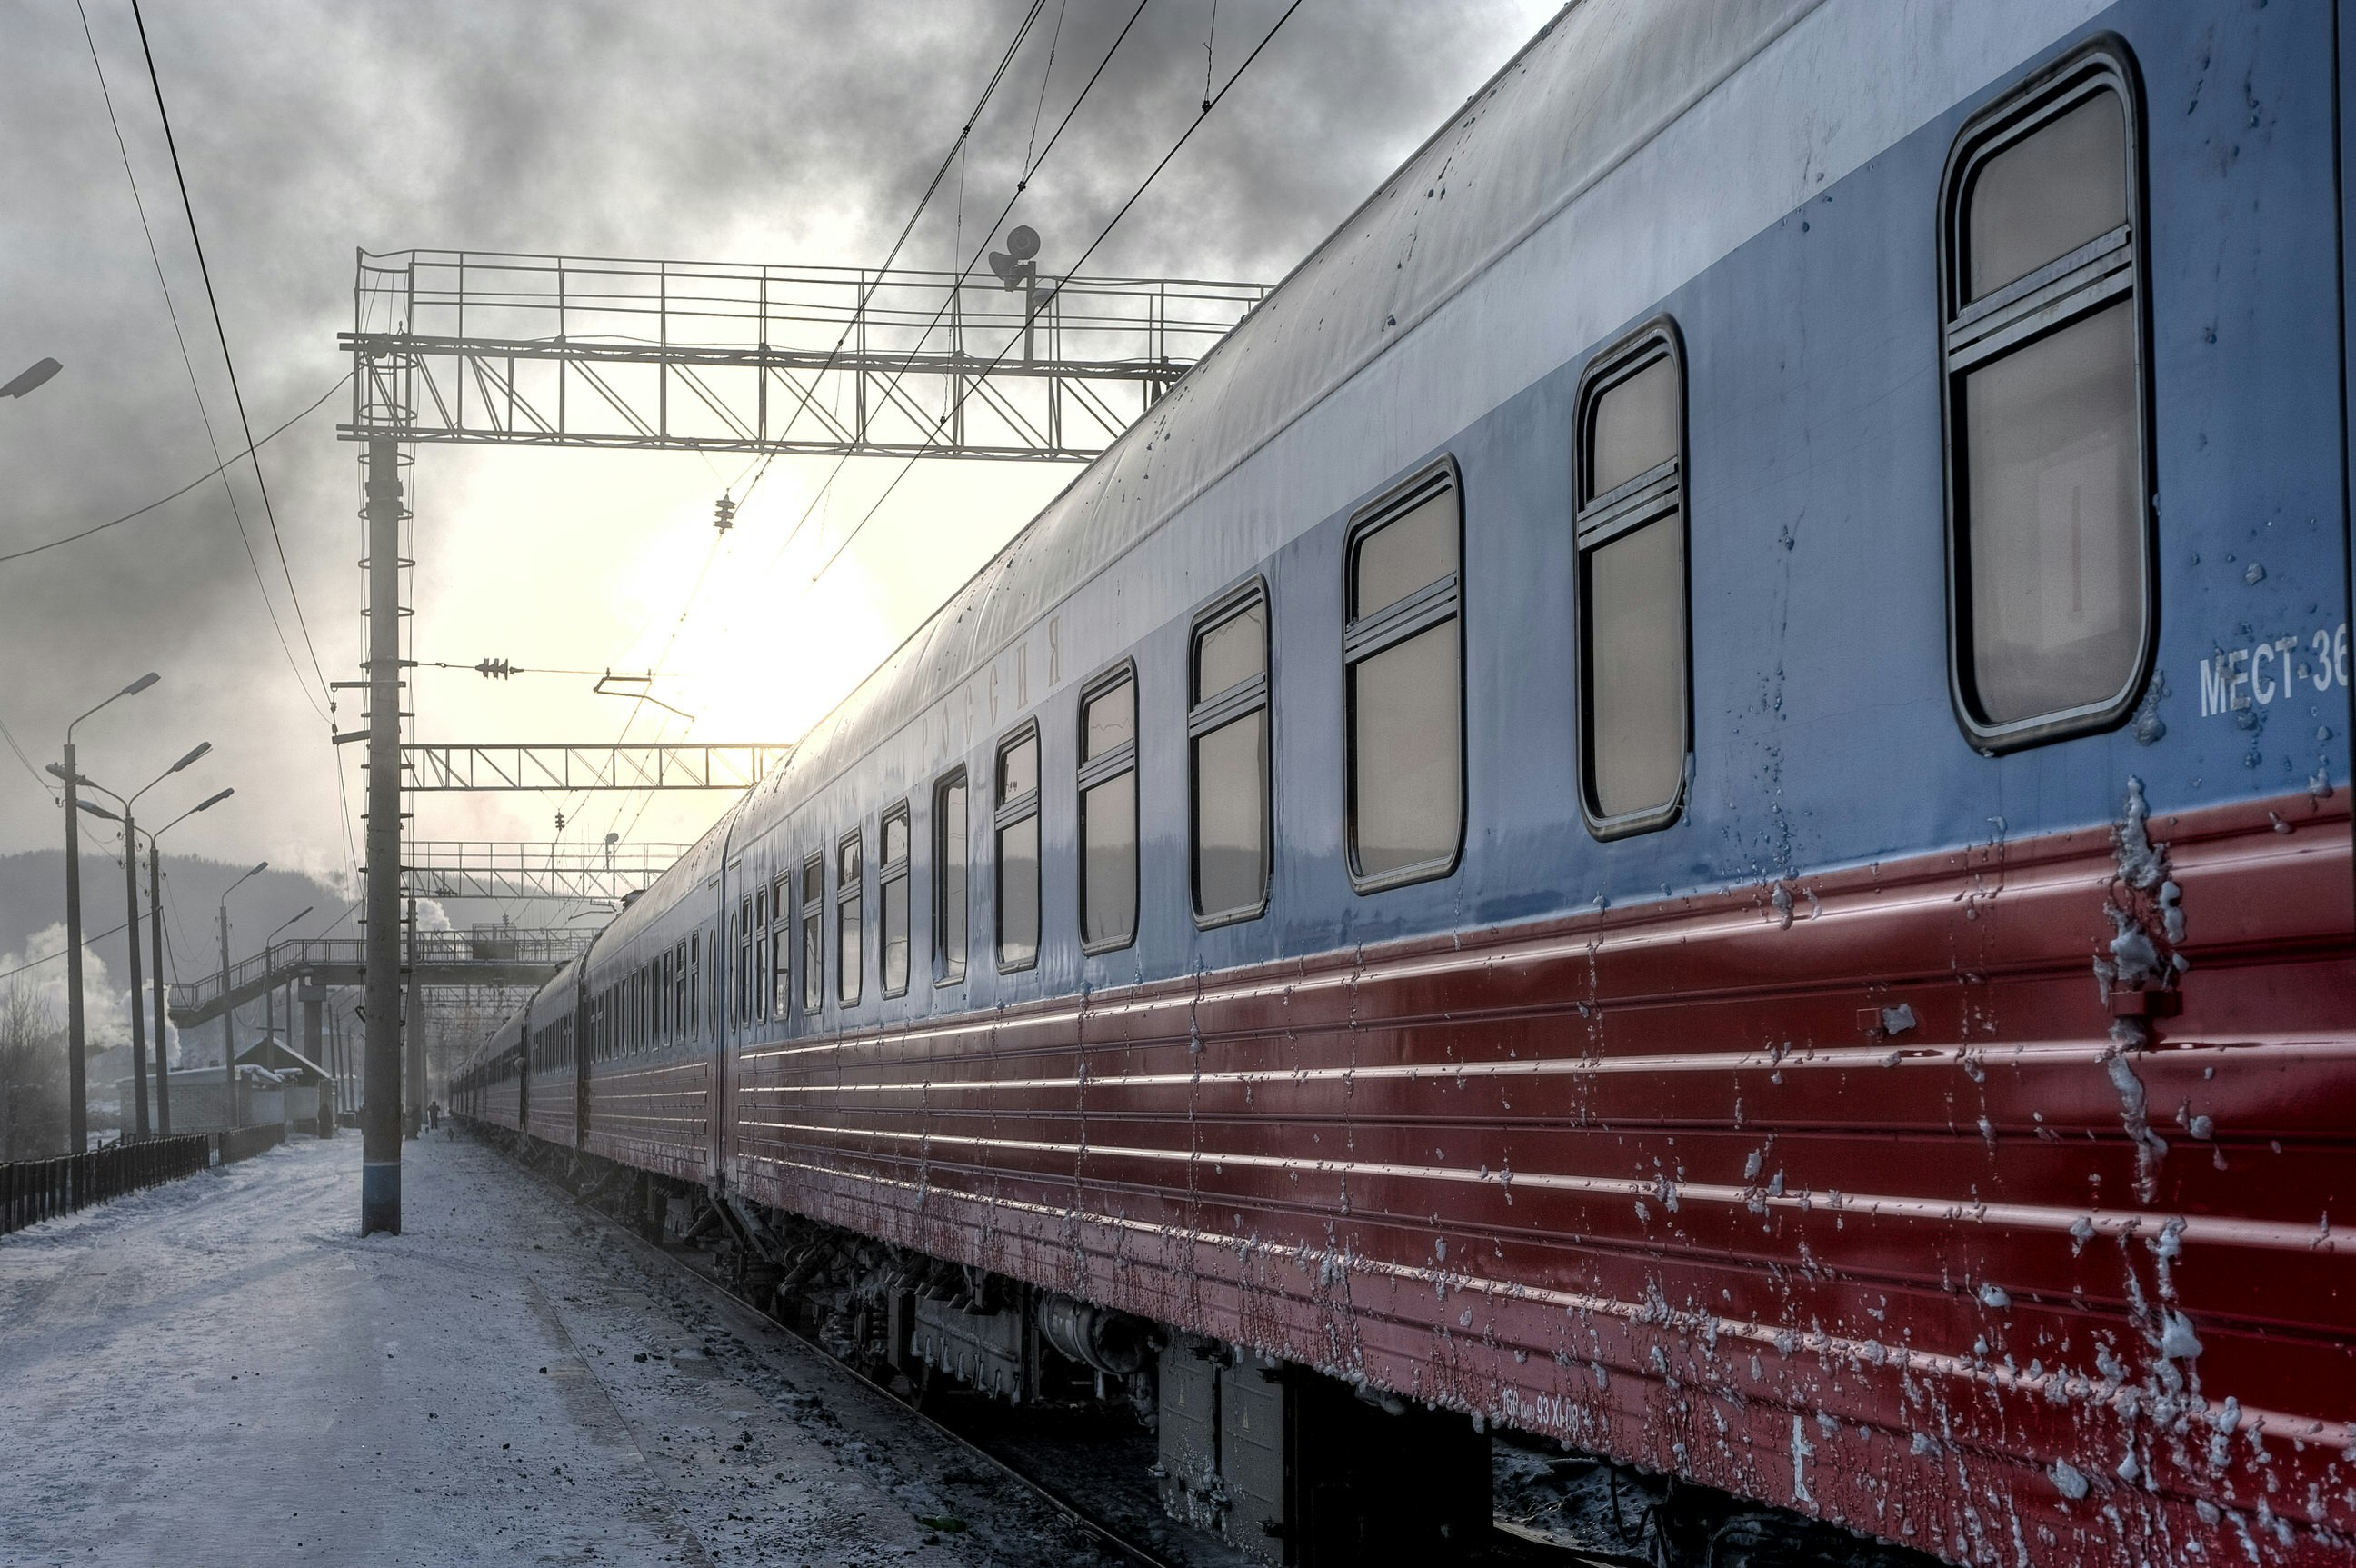 A red and grey train stand at an icy platform; grey clouds loom in the sky and there are many overhead power lines.